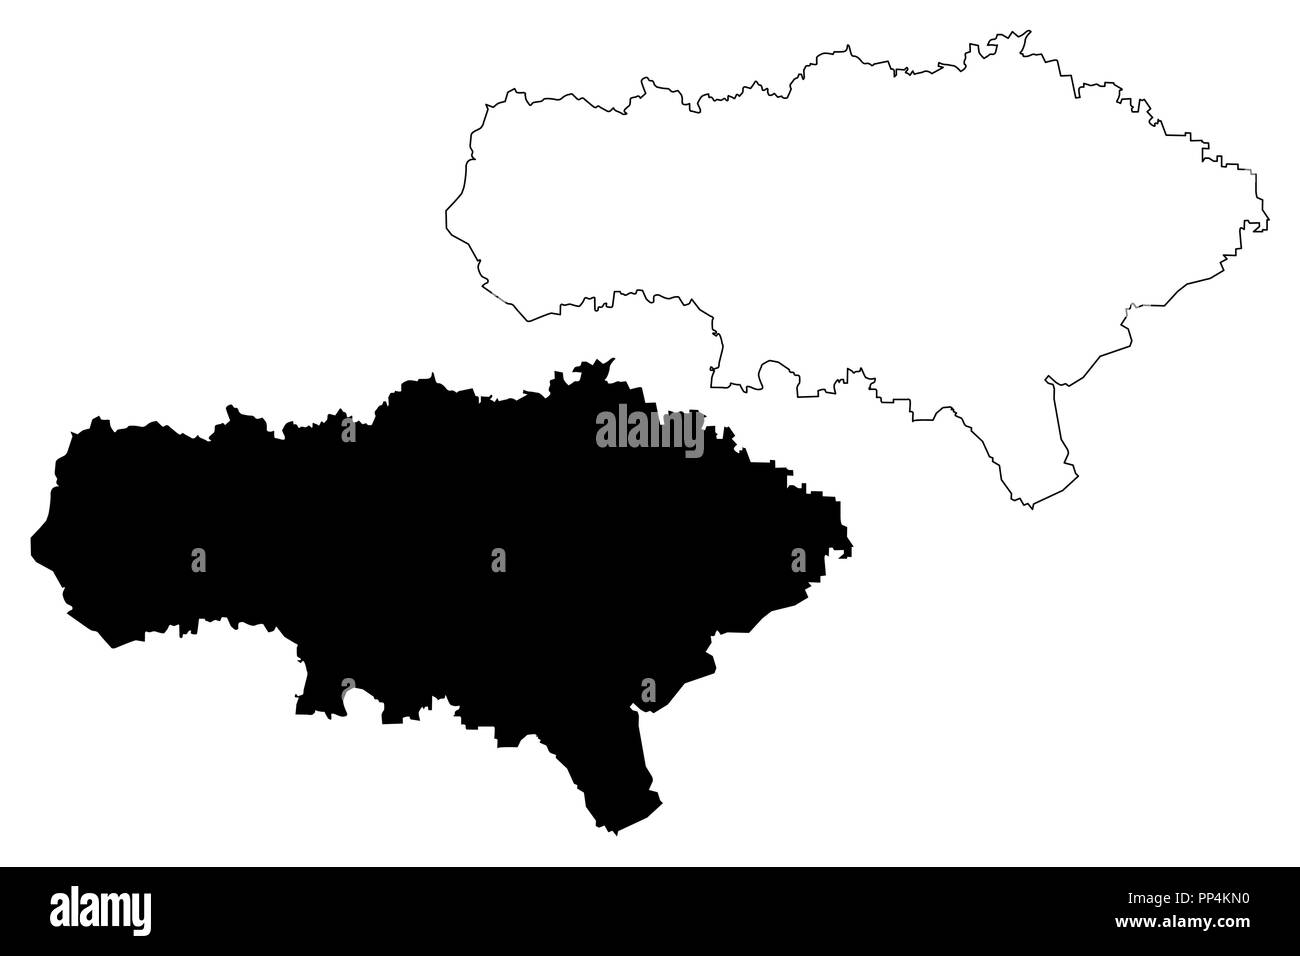 Saratov Oblast (Russia, Subjects of the Russian Federation, Oblasts of Russia) map vector illustration, scribble sketch Saratov Oblast map Stock Vector